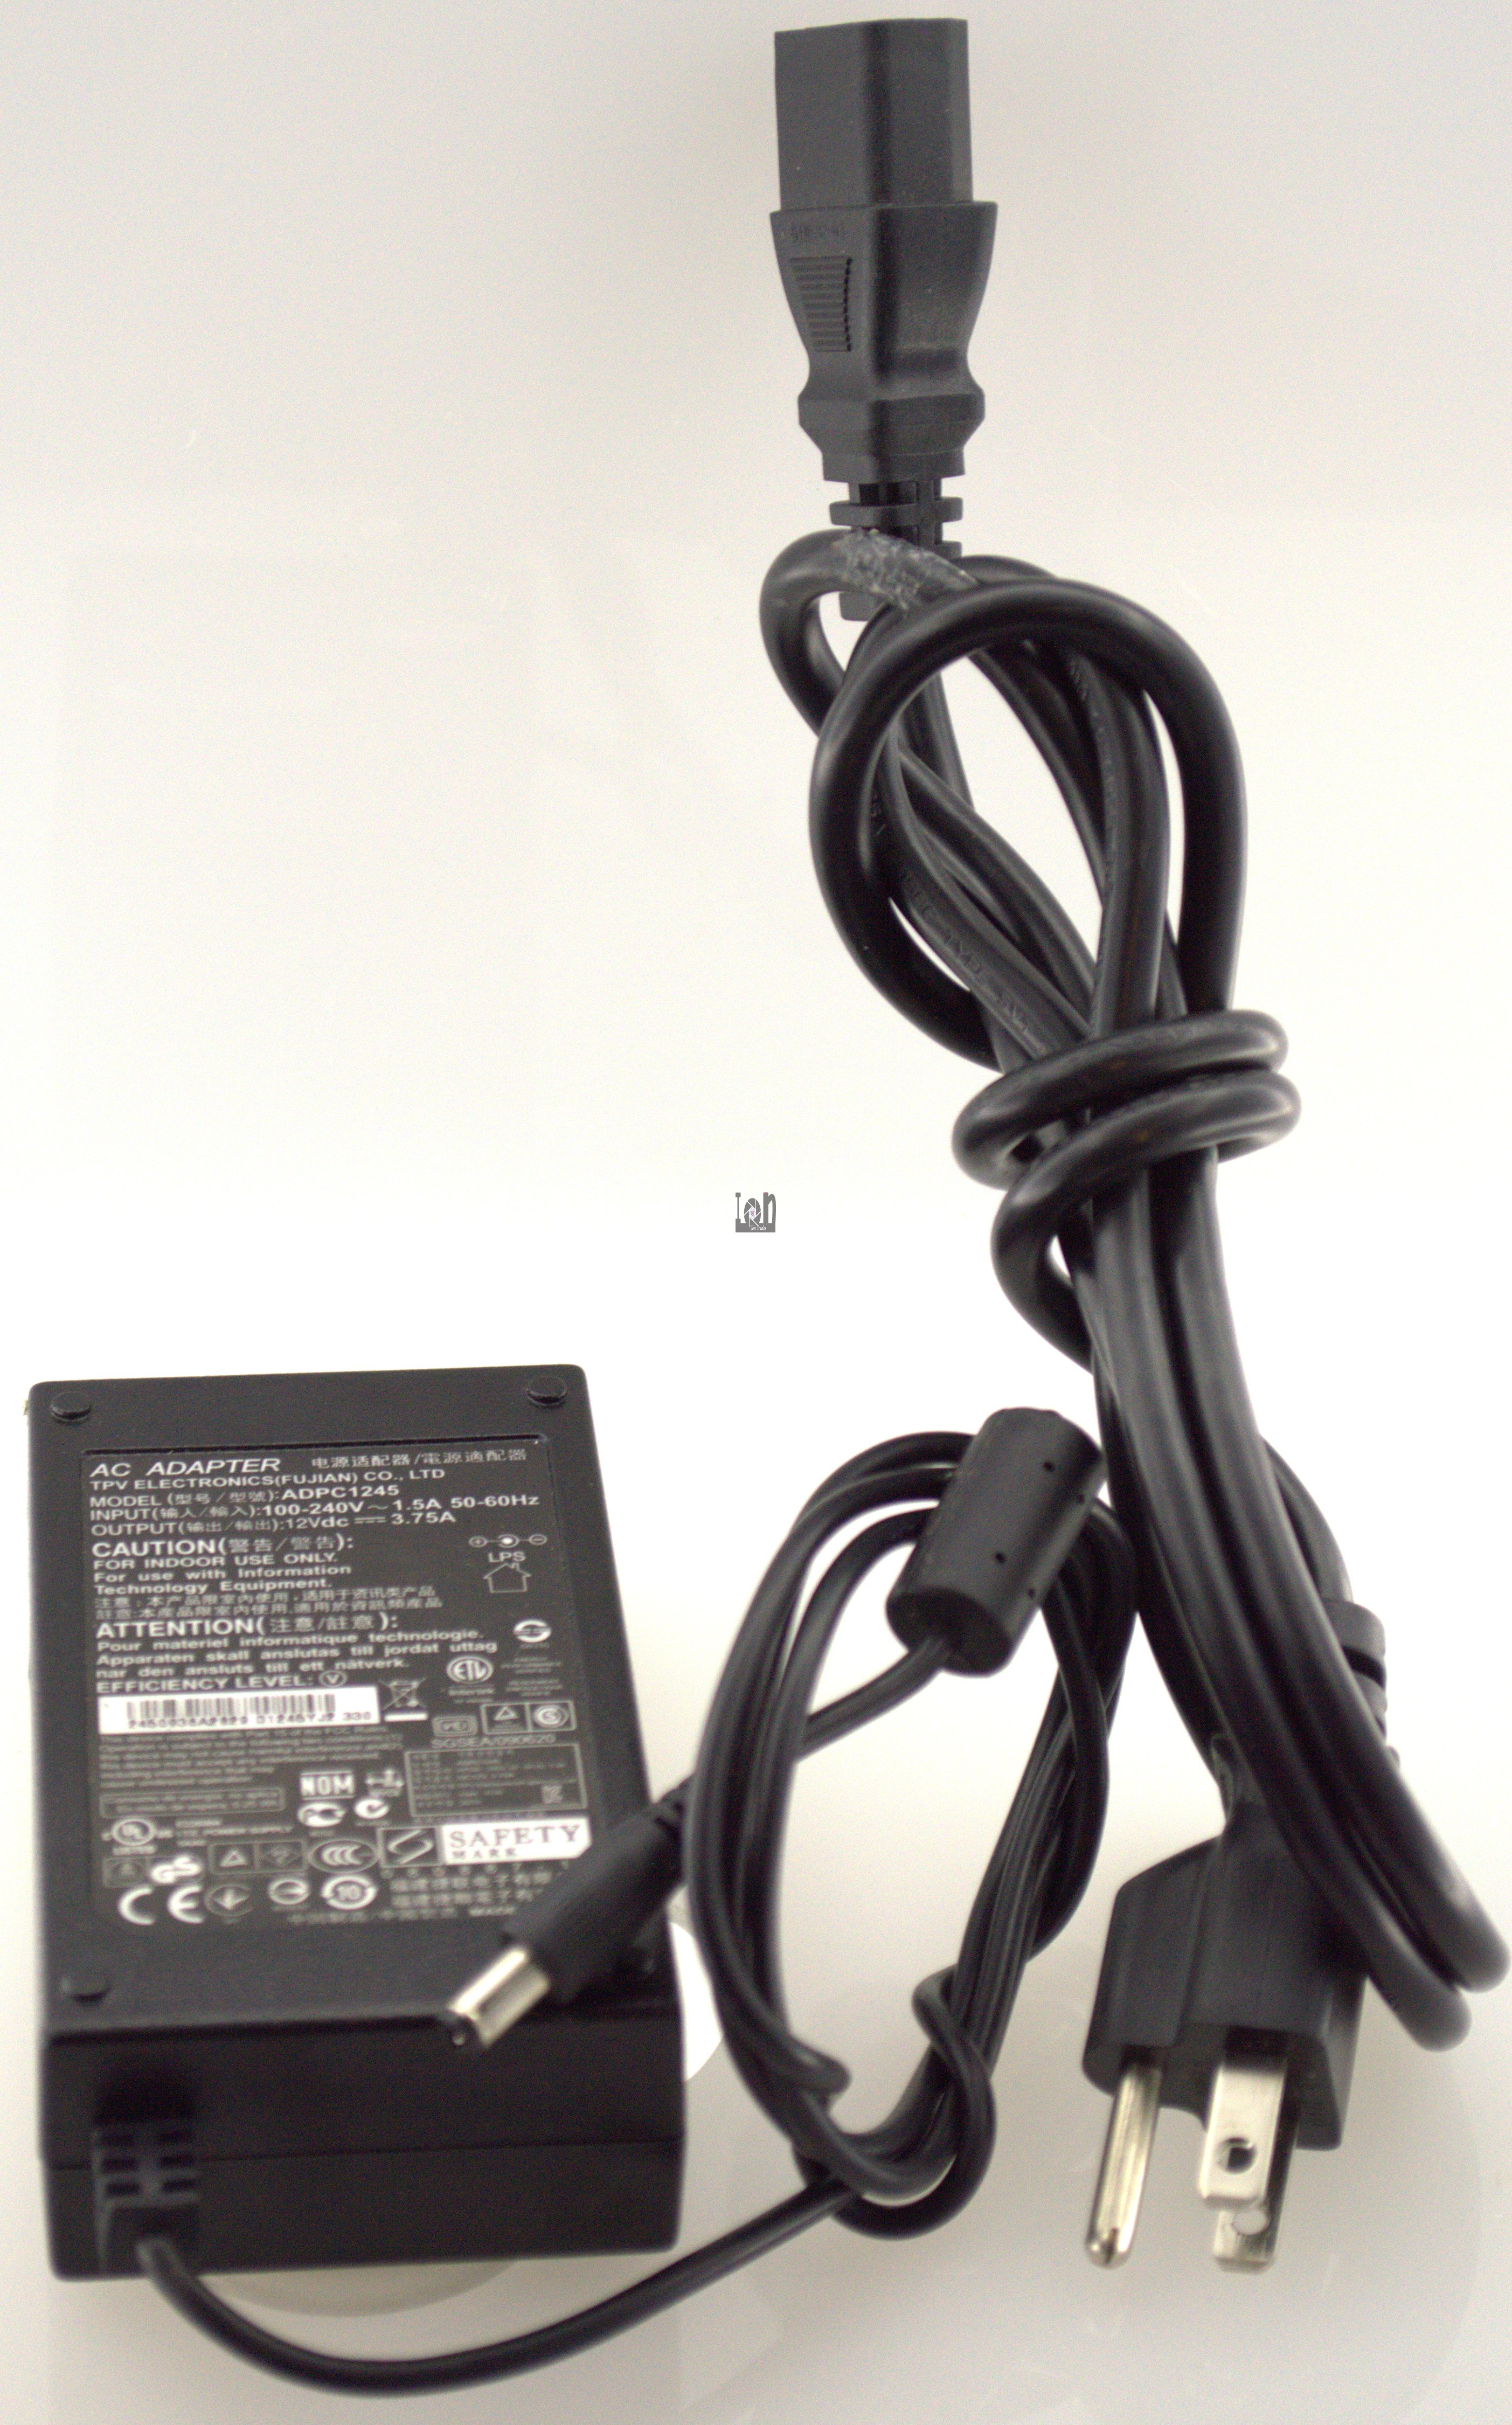 ADPC1245 AC Adapter 12V 3.75A Power Supply for LCD Monitor